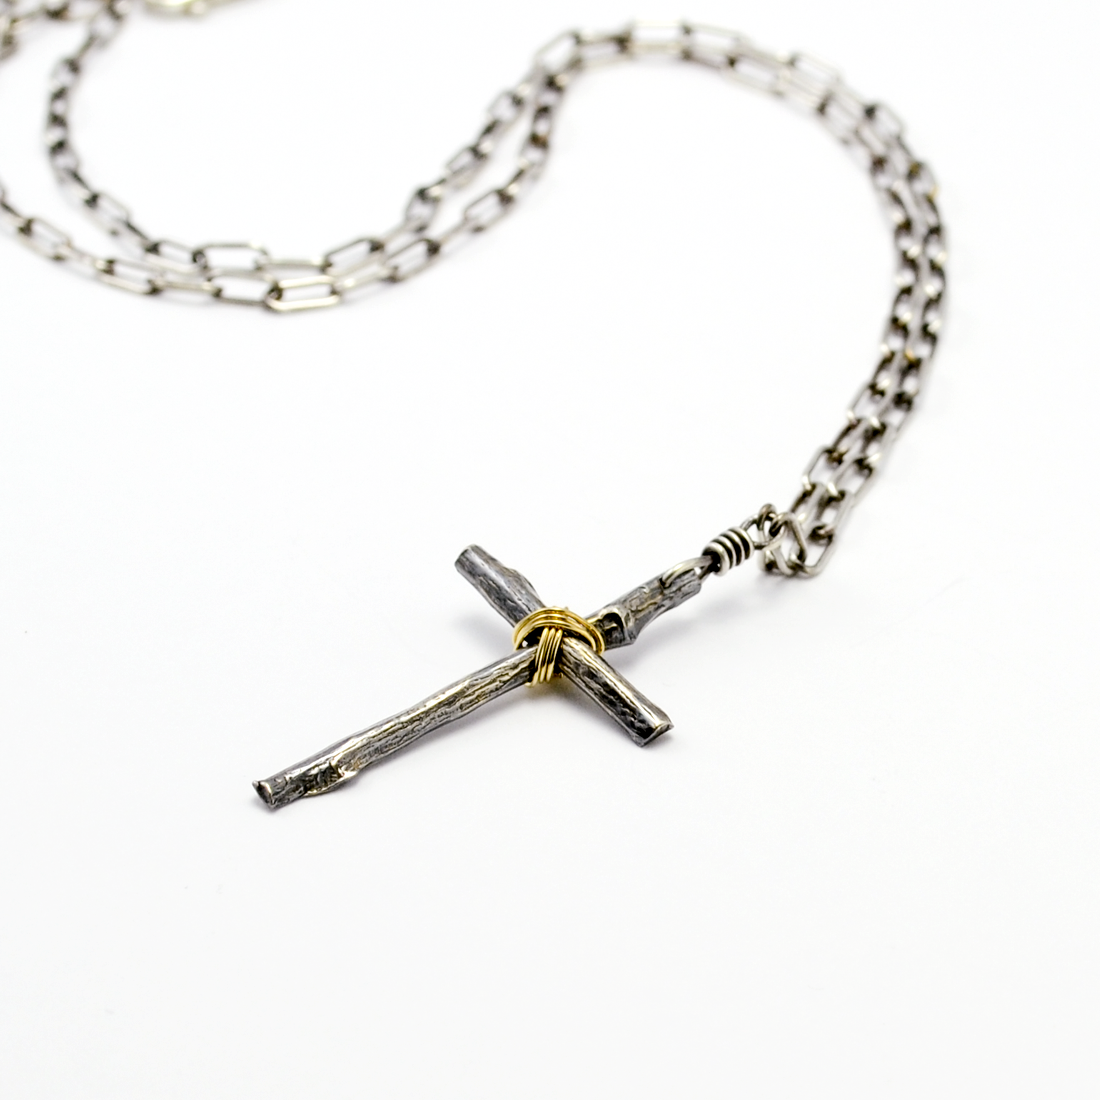 Greater Love Christian Jewelry Collection by Tracy Hibsman Studio